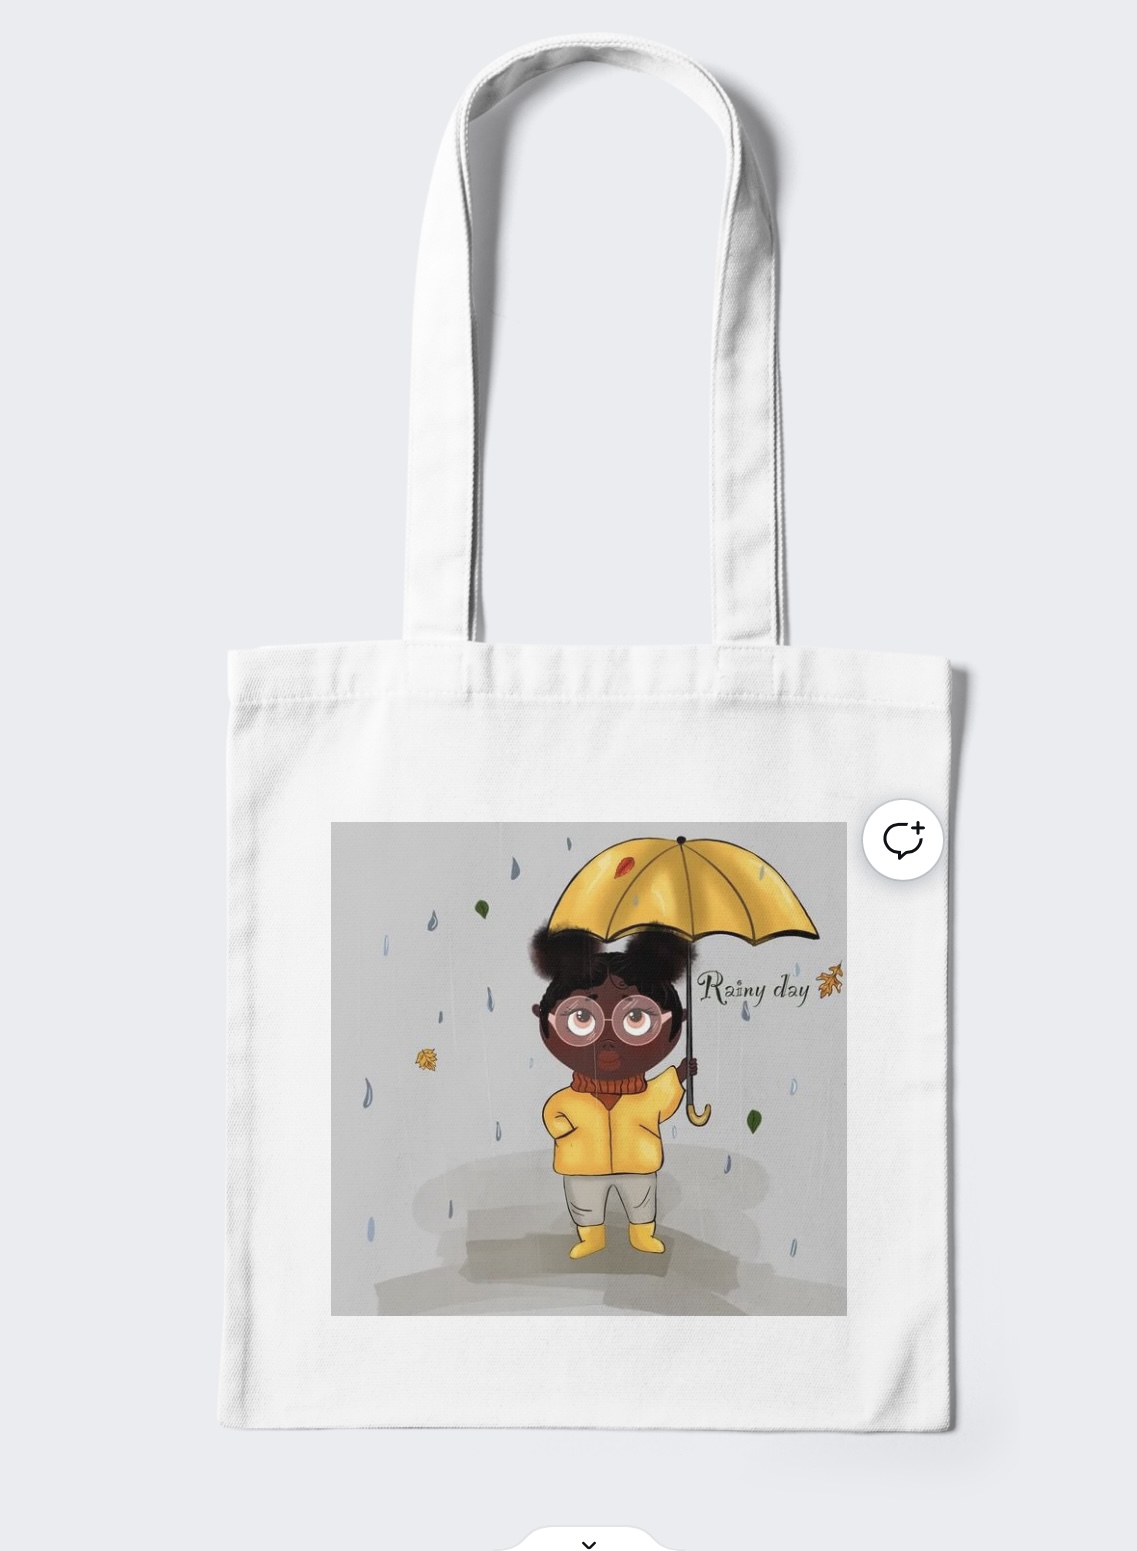 Picture of a bag with an amazing print of a little afro girl in a yellow suit under an umbrella.